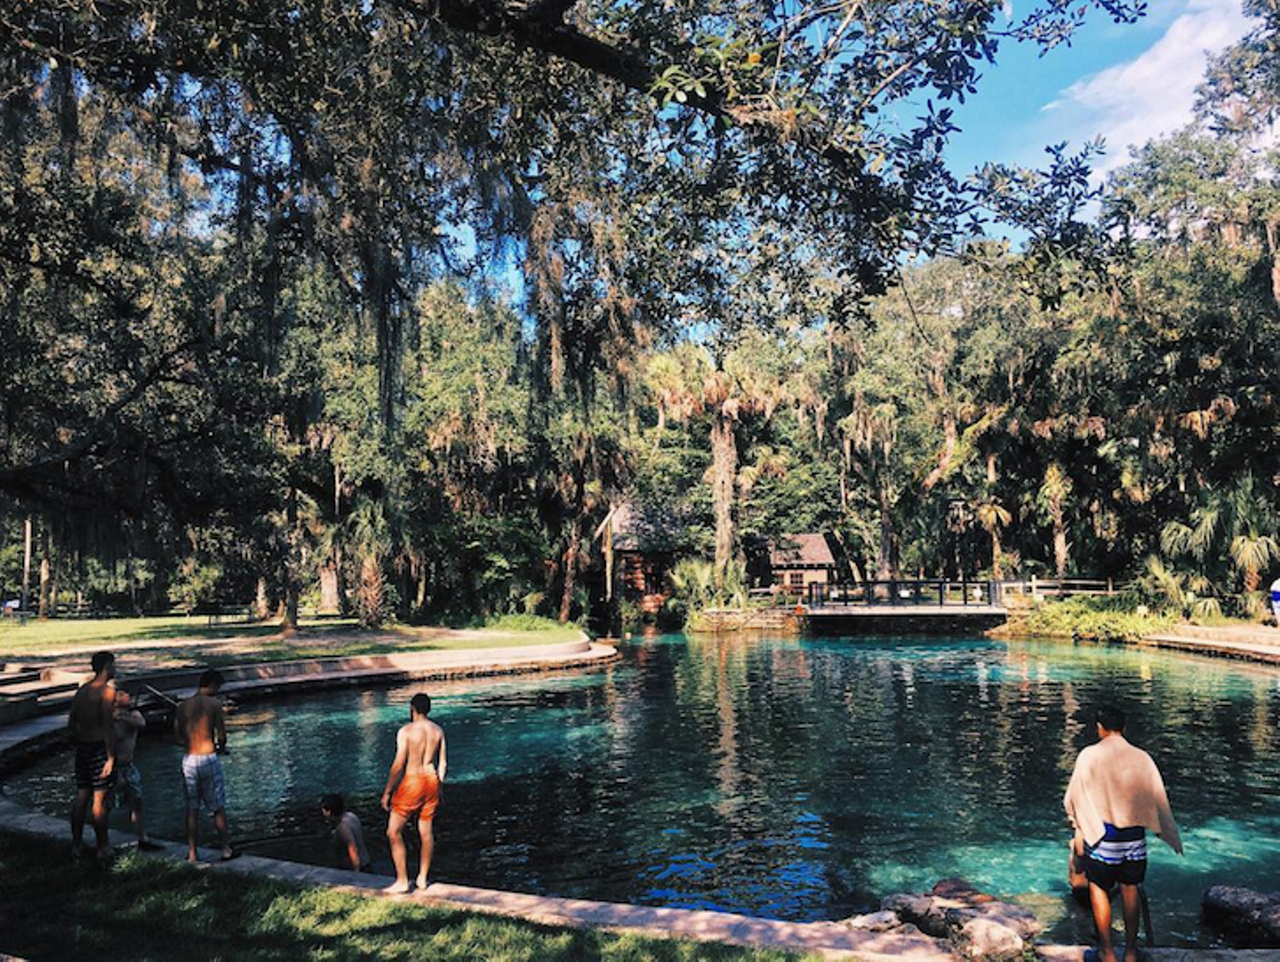 Juniper Springs Recreation Area
Estimated driving distance from Orlando: 1 hour 19 min
Created by the Civilian Conservation Corps in the 1930s, Juniper Springs has swimming, camping, hiking trails and a famous 7-mile canoe run that&#146;s pretty hard to accomplish. Canoe rentals are available as well as camping for $21 + tax per night.
Photo via thematosshow/Instagram